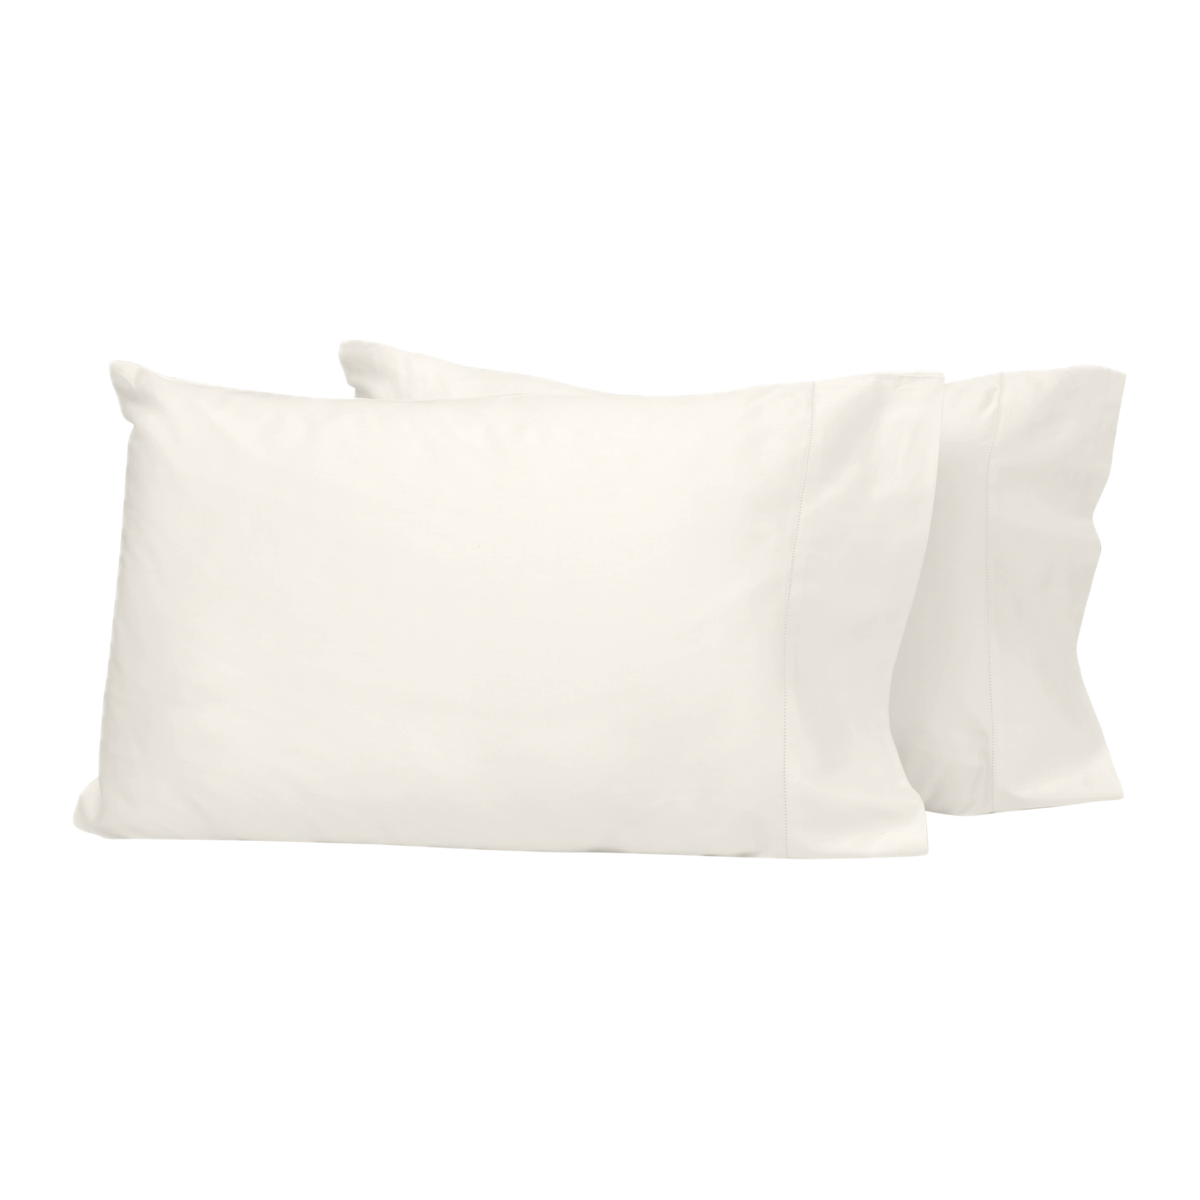 Pair of Pillowcases of Ivory Signoria Nuvola Percale Bedding